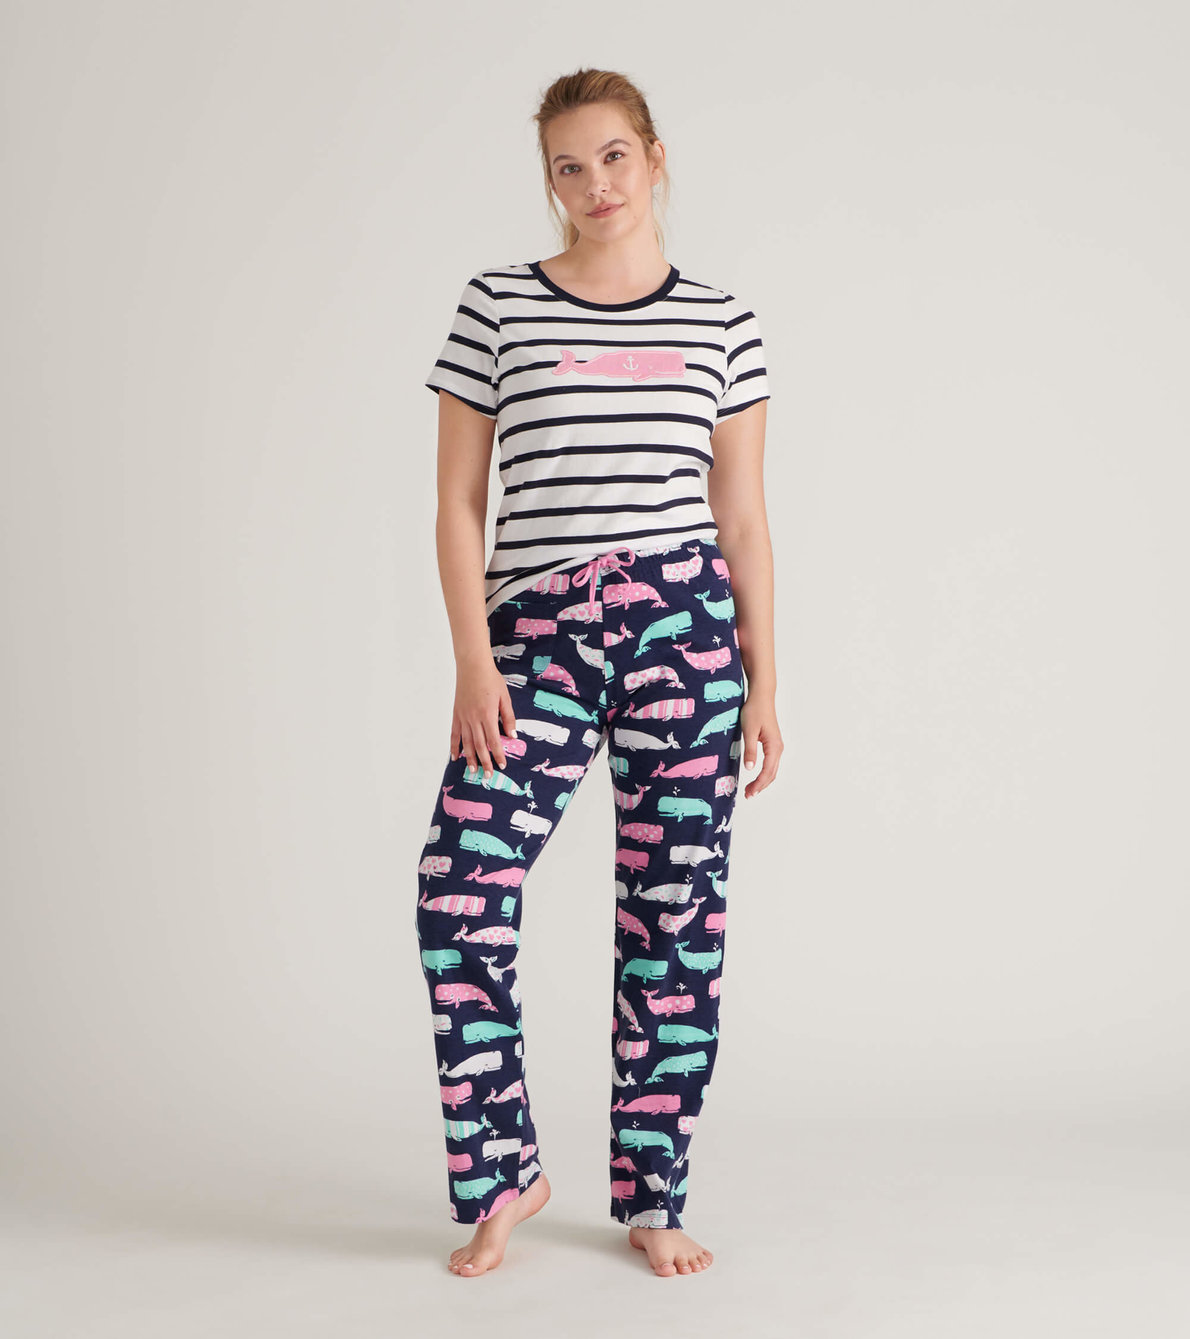 View larger image of Whales Women's Tee and Pants Pajama Separates